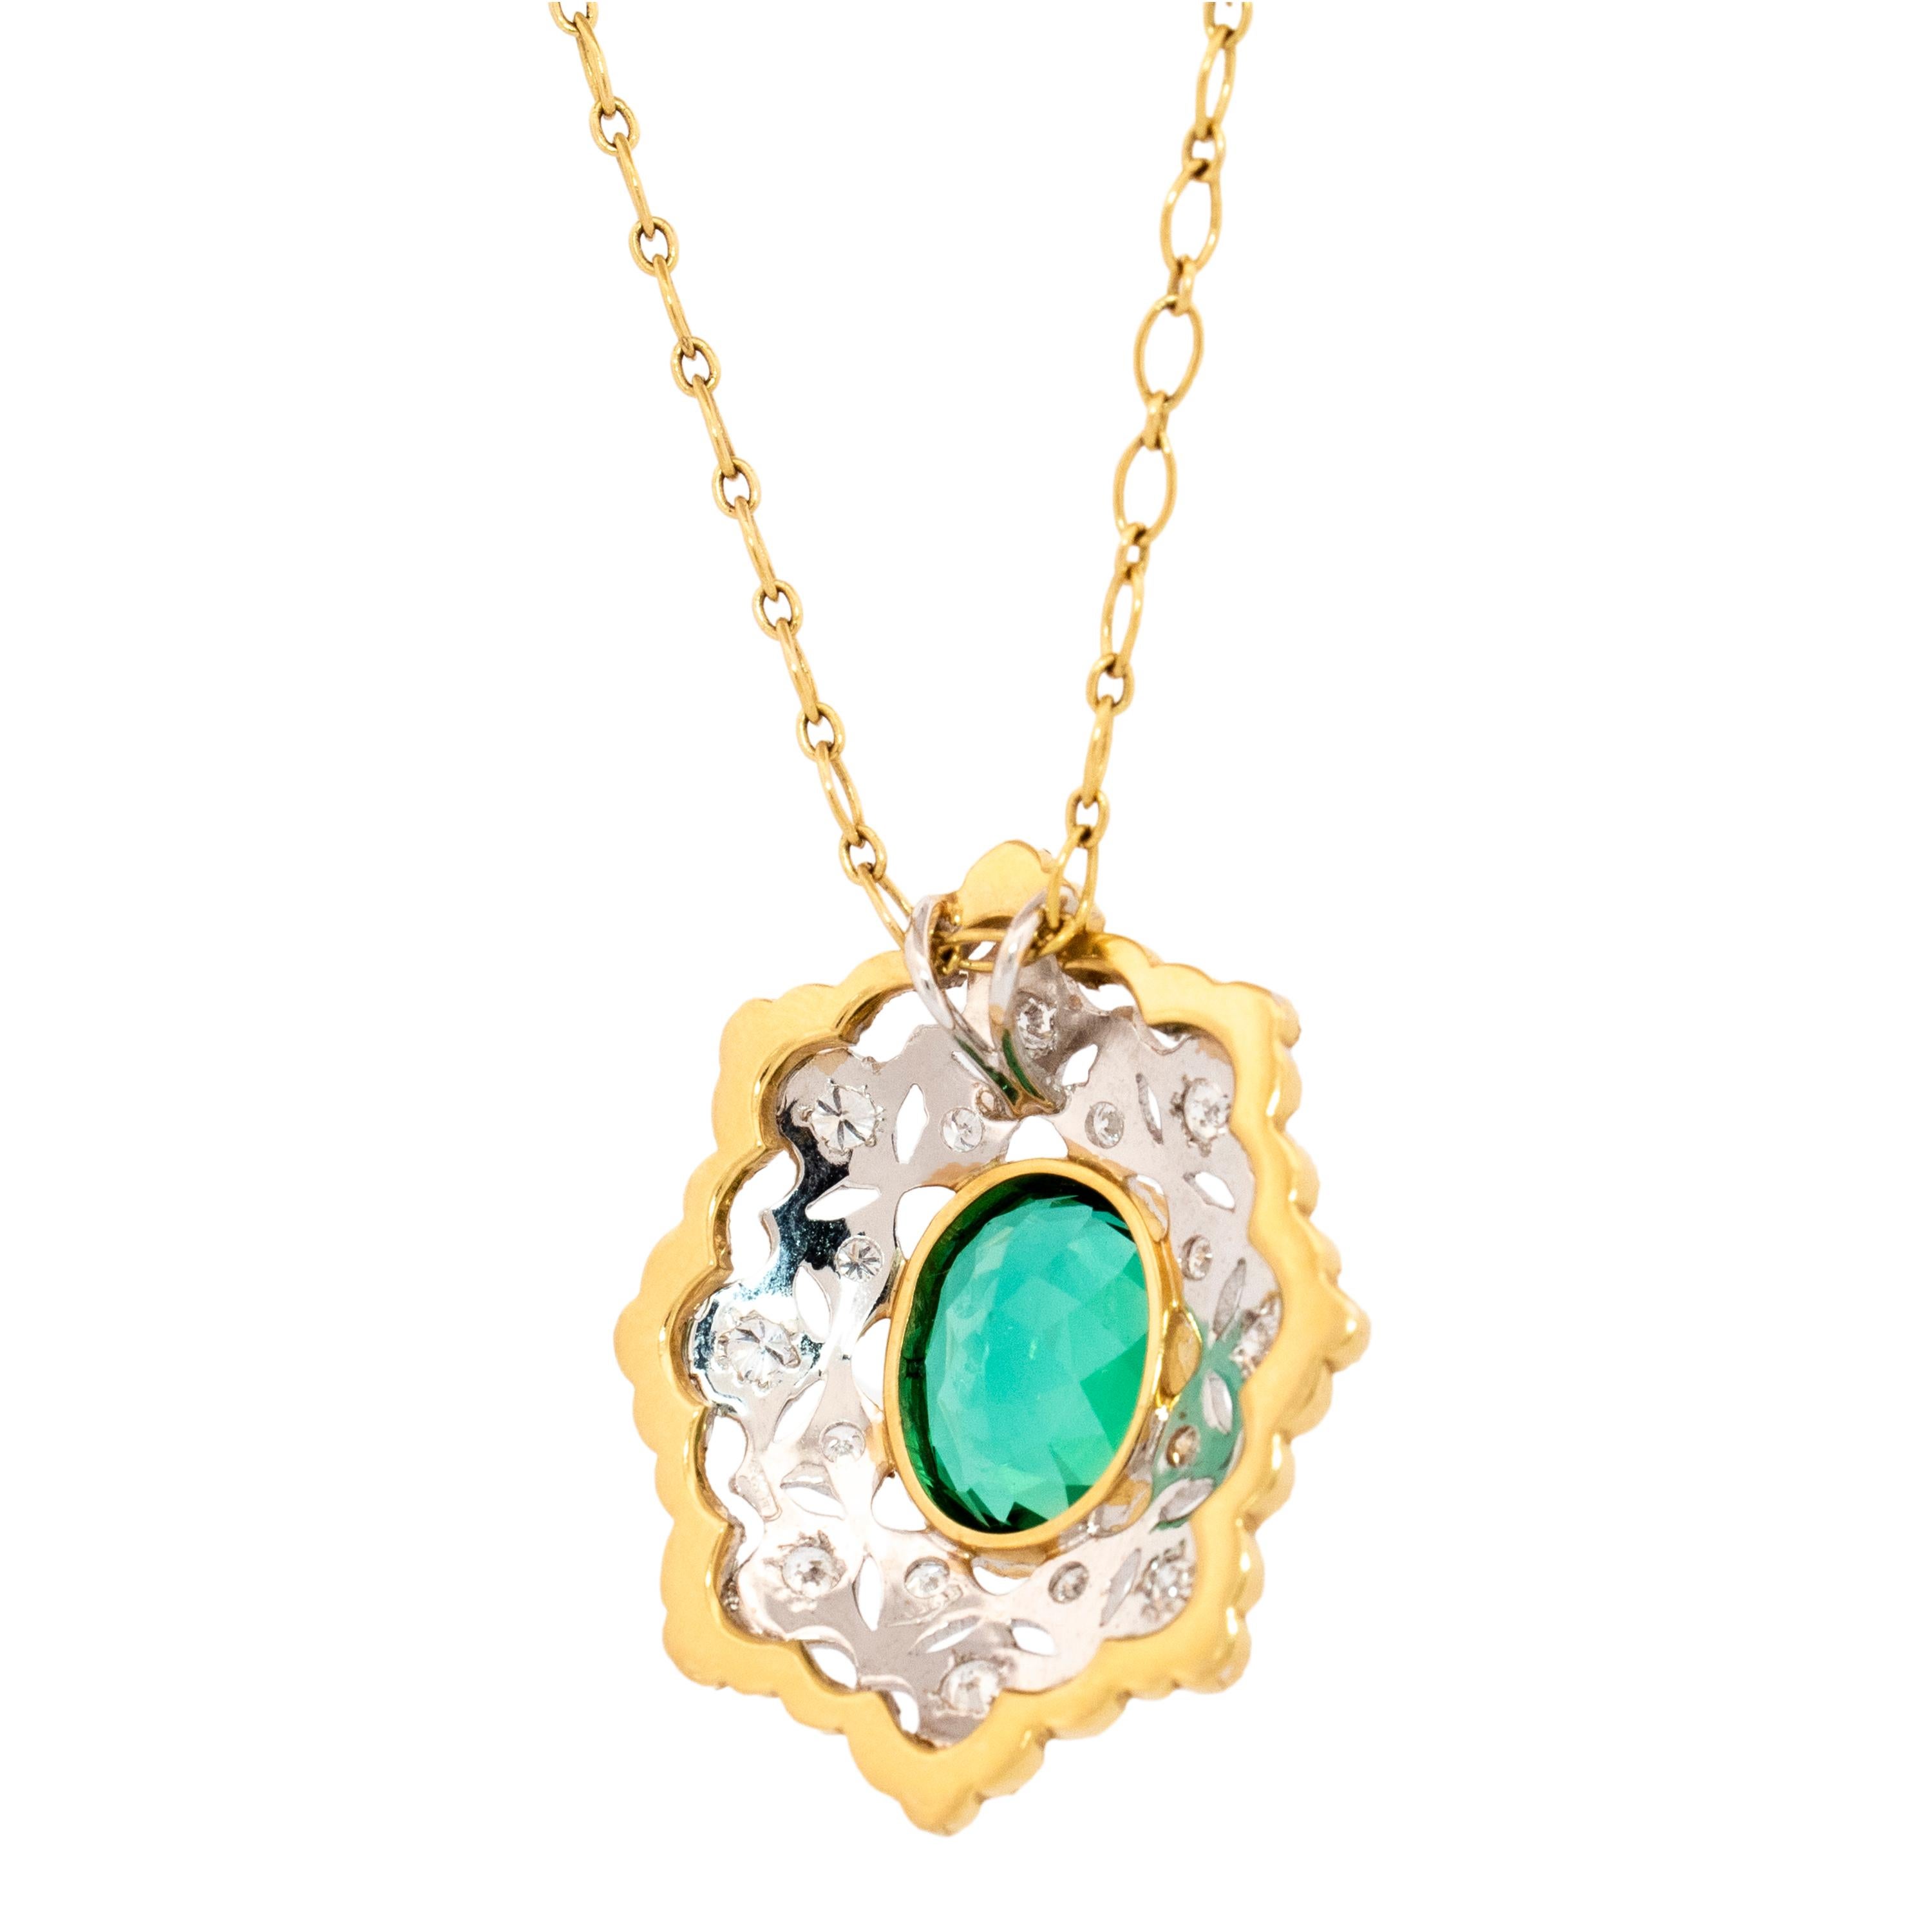 Oval Cut 4.30ct Green Tourmaline and 18kt Gold Necklace, Made in Italy by Cynthia Scott For Sale